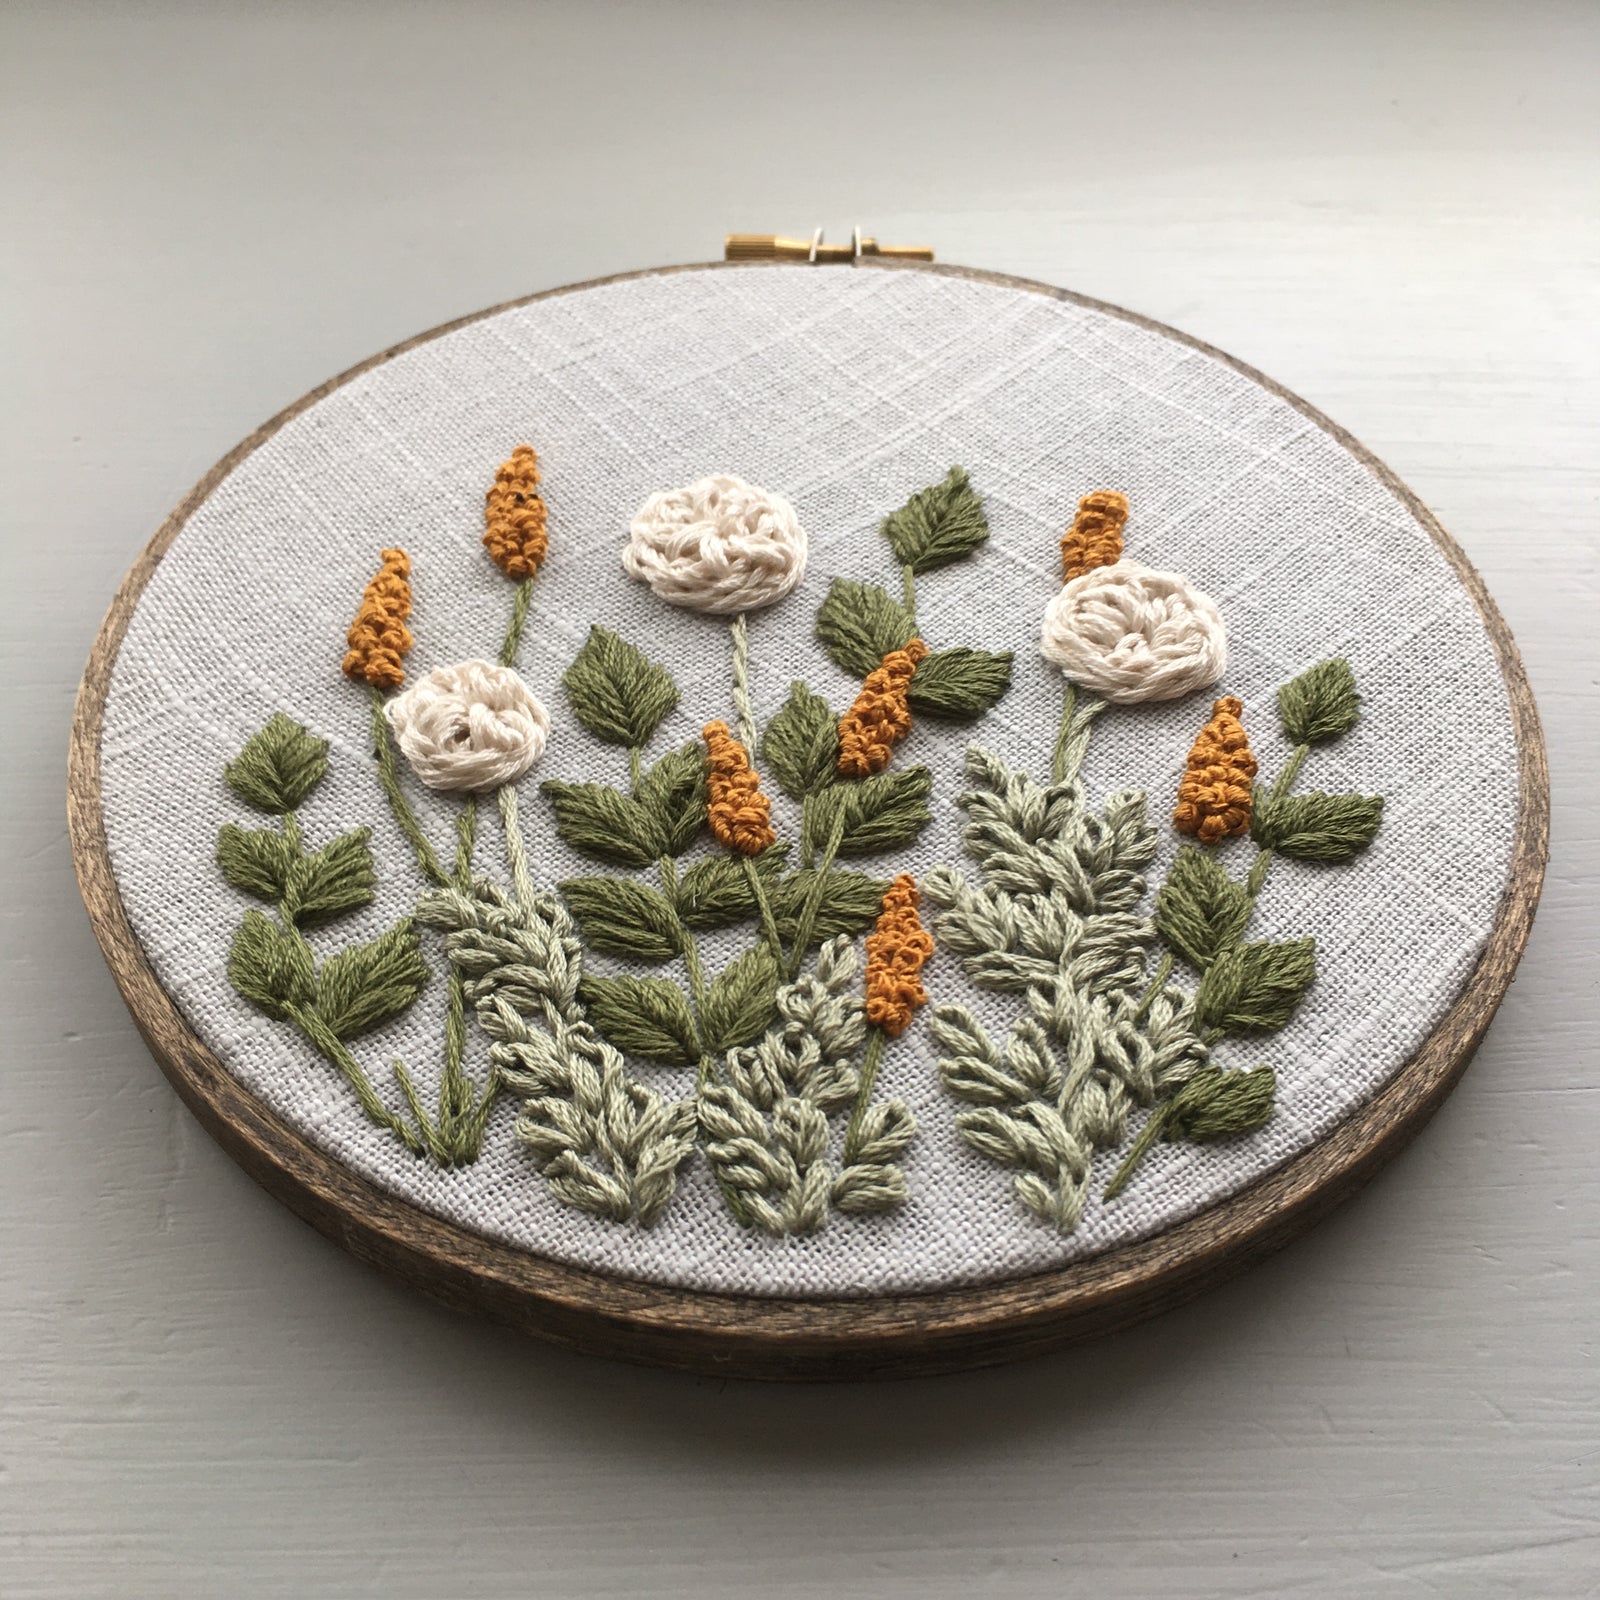 HELLO Hand-Embroidery Kit – Salty Oat